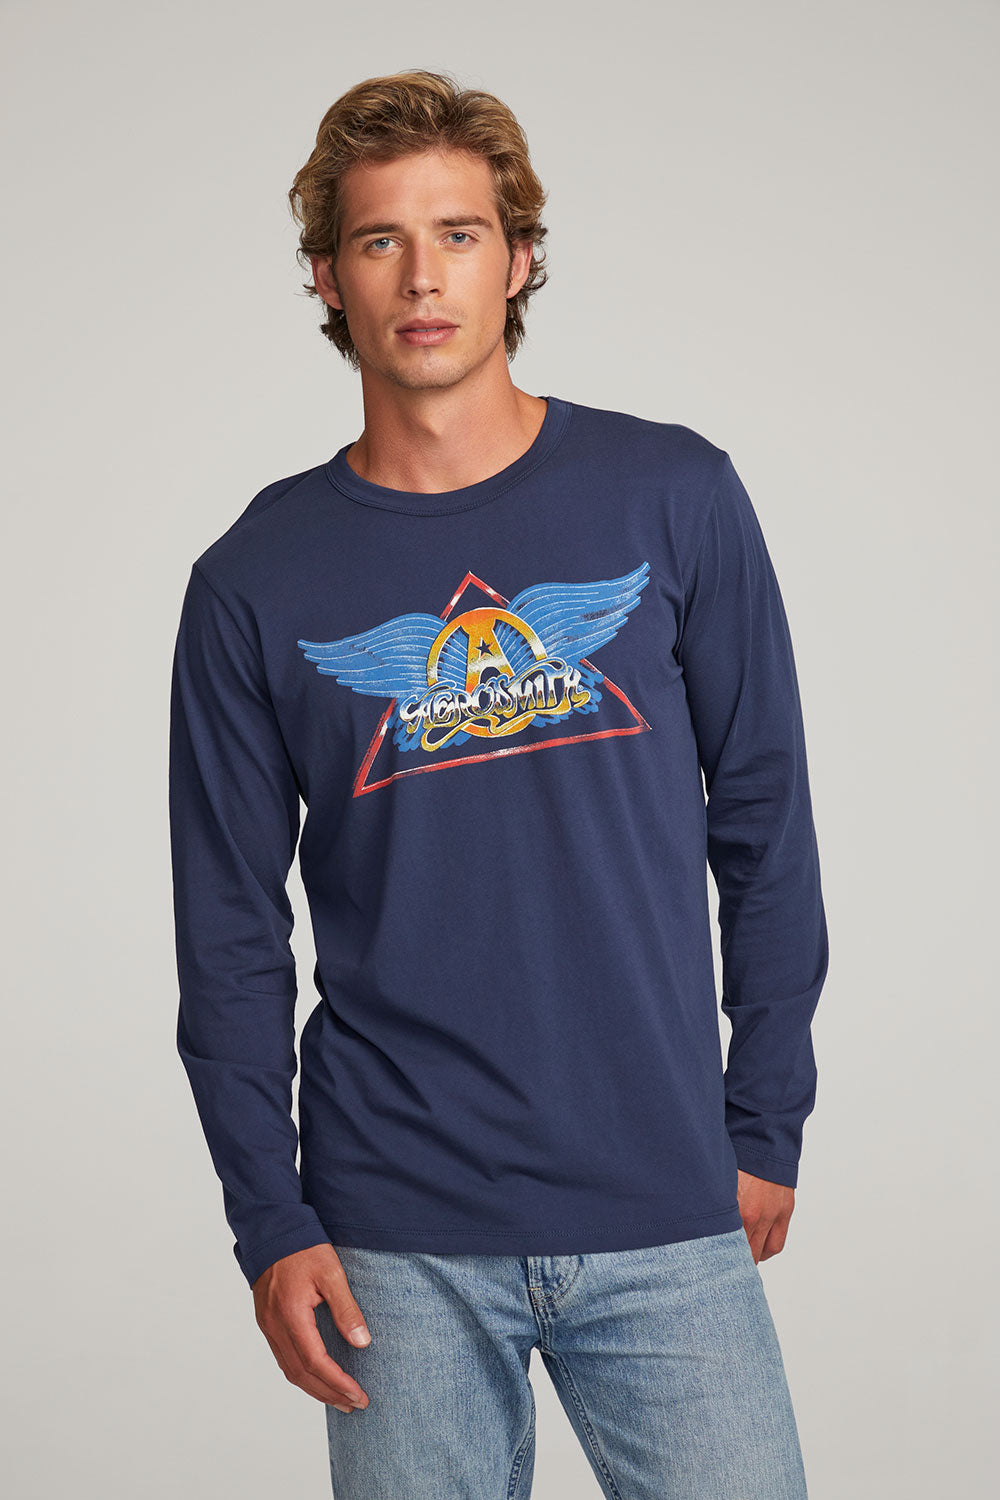 Aerosmith Rock In a Hard Place Mens Long Sleeve MENS chaserbrand